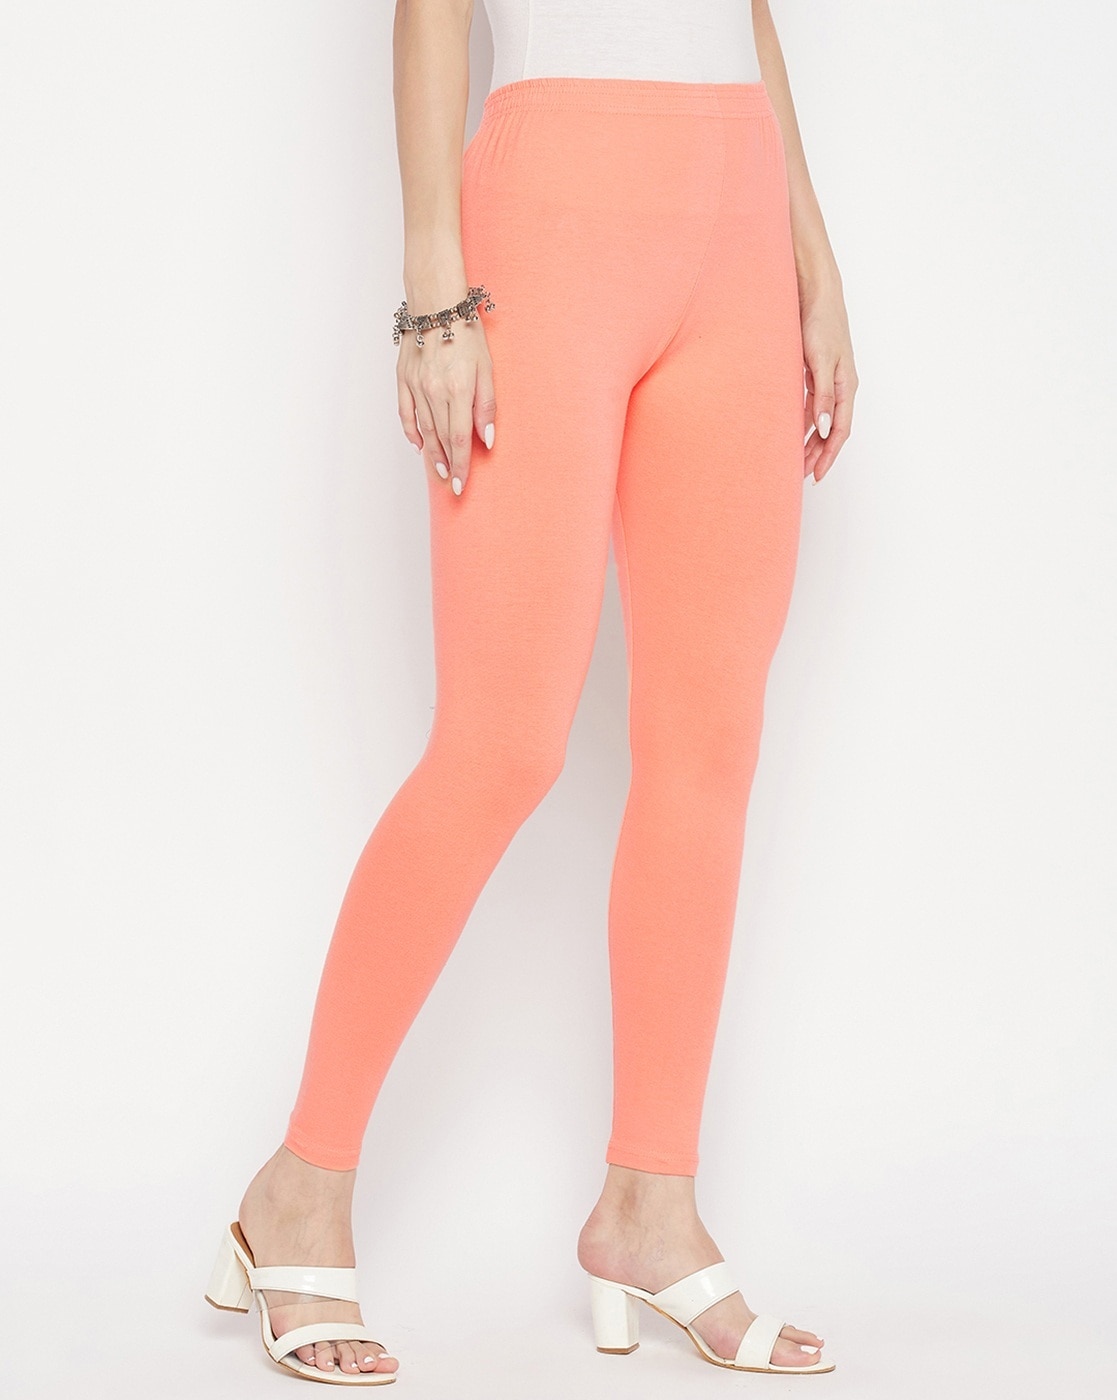 TWIN BIRDS Pink & Peach Plain Cropped Leggings - Pack Of 2